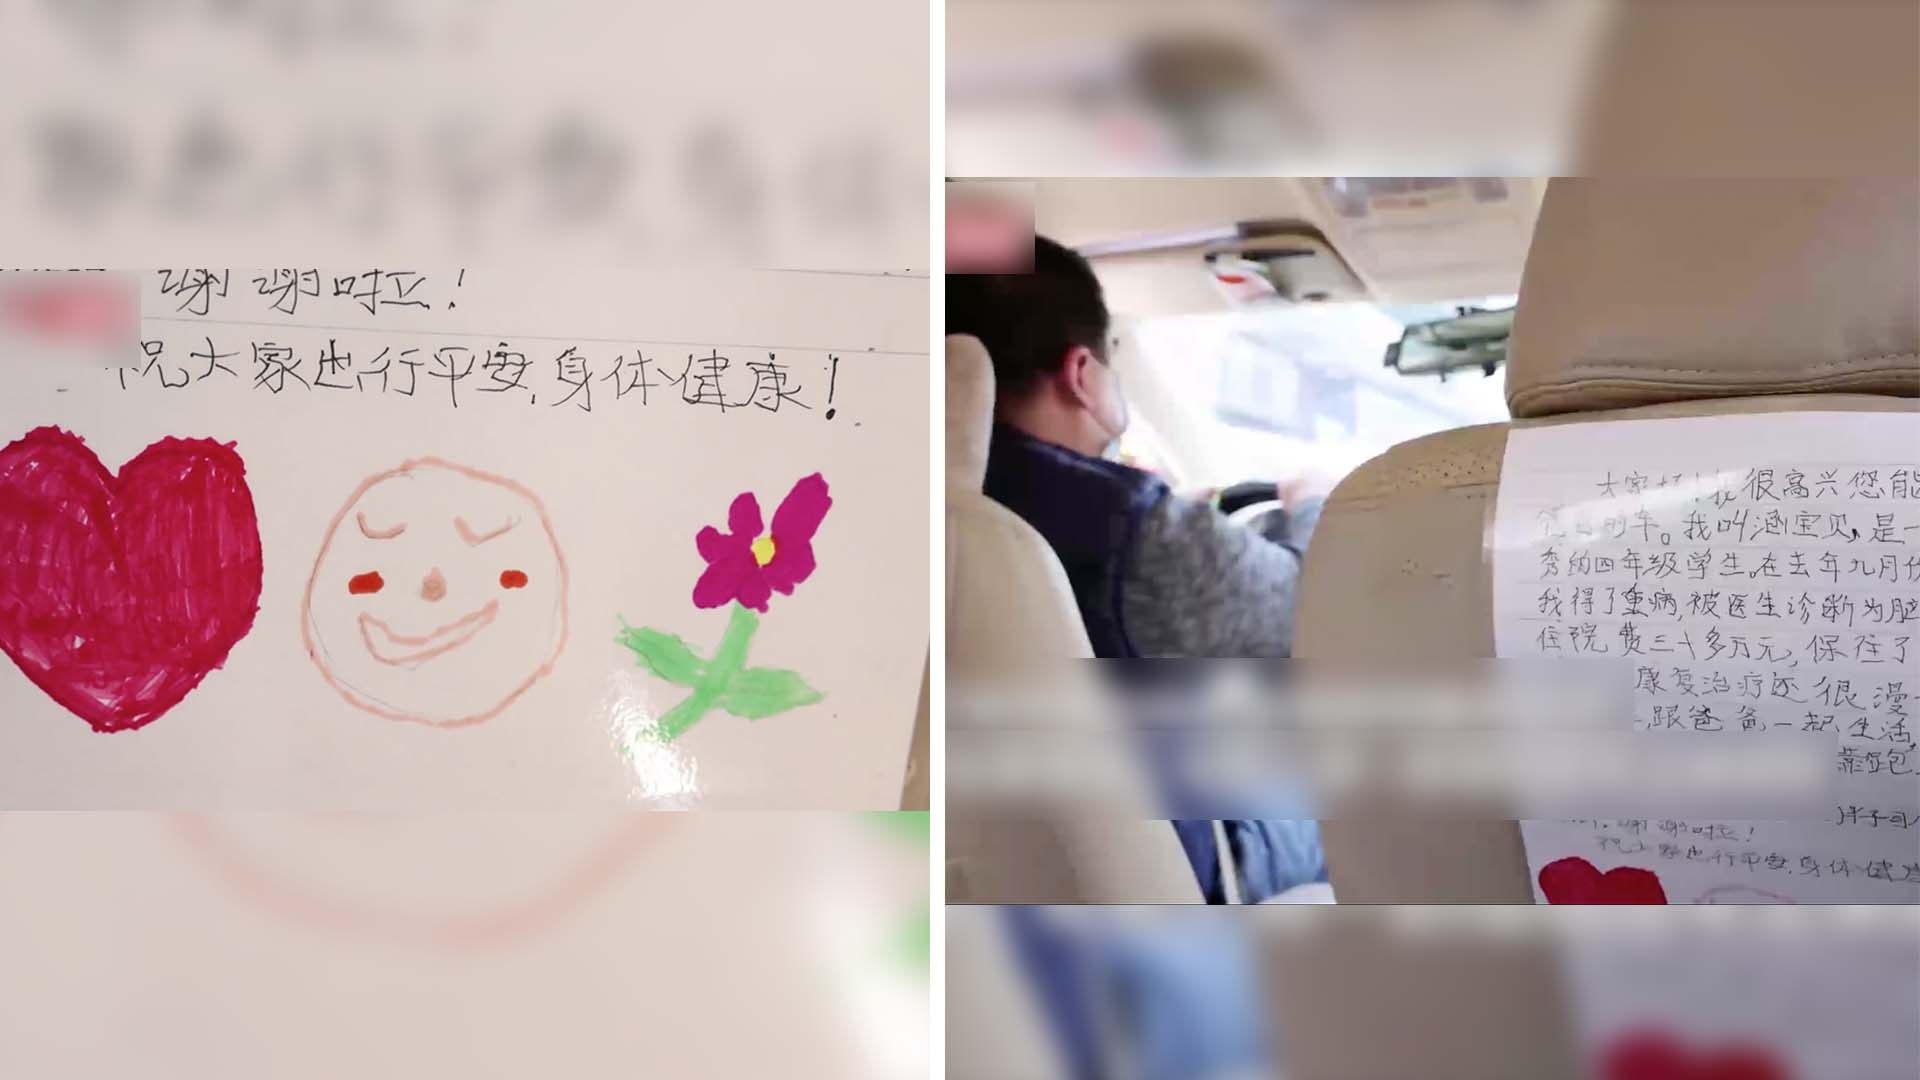 This letter asking for positive ride-hailing reviews from a driver’s daughter went viral in China. Photo: SCMP composite